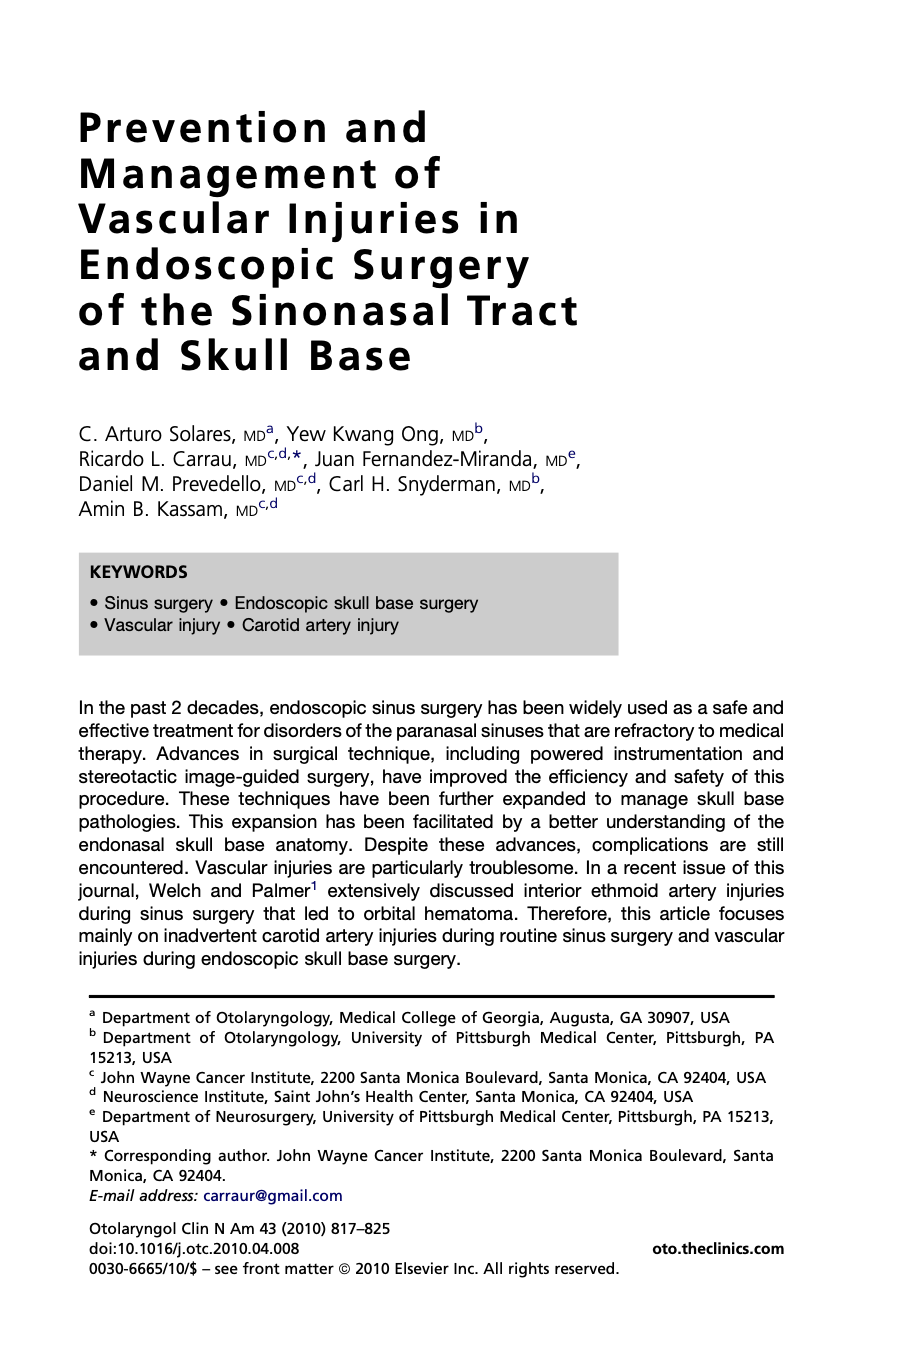 Prevention and Management of Vascular Injuries in Endoscopic Surgery of the Sinonasal Tract and Skull Base